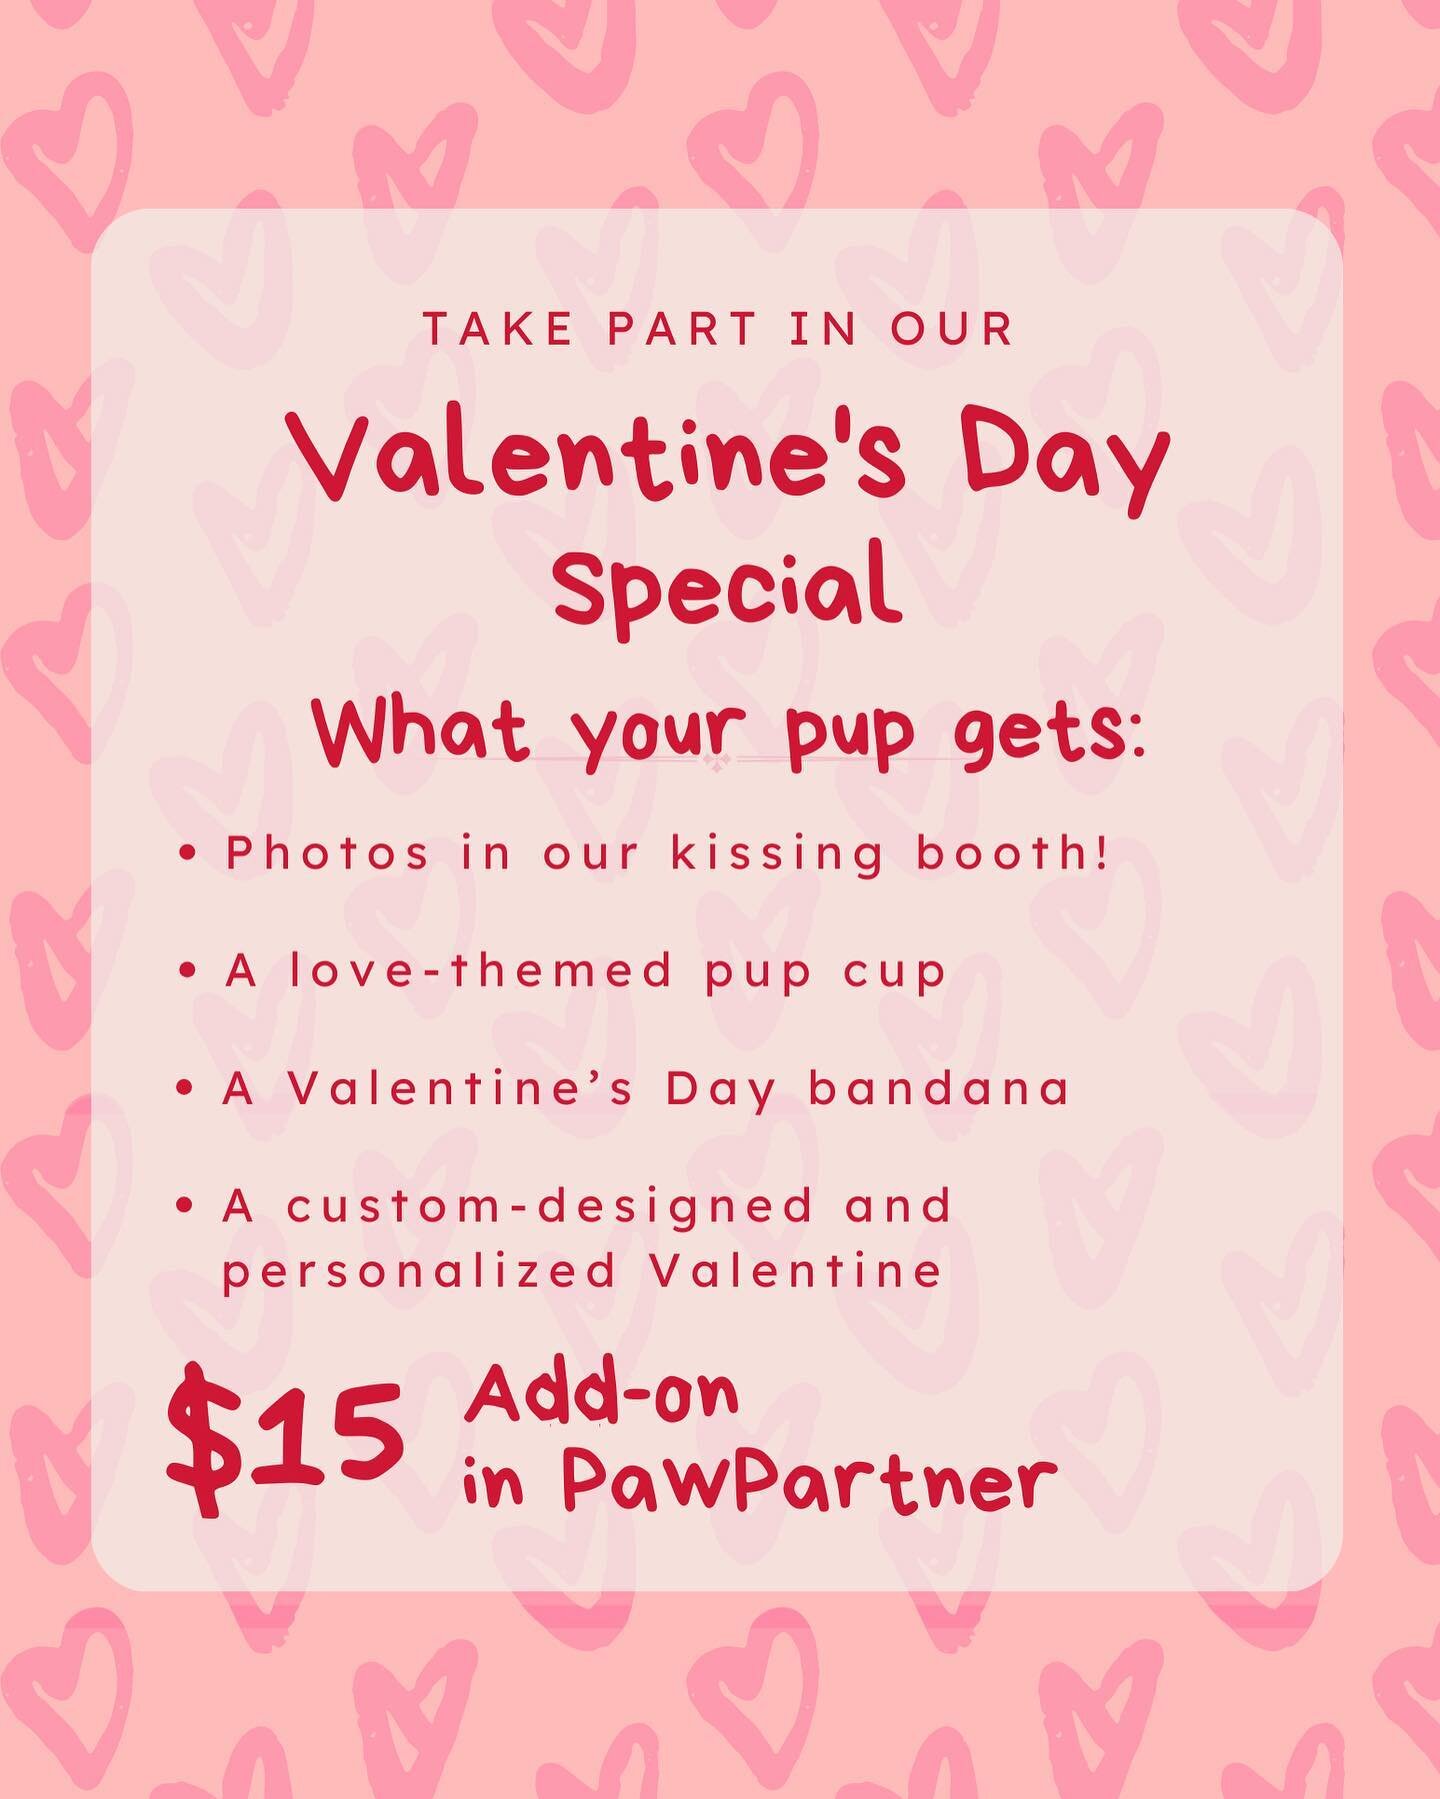 💕THE VALENTINE&rsquo;S DAY SPECIAL IS HERE💕 
For the full month of February, add the Valentine&rsquo;s Day Special to your reservation on PawPartner or let us know you&rsquo;d like to take part when your drop off your pup! 
Now including a secondar